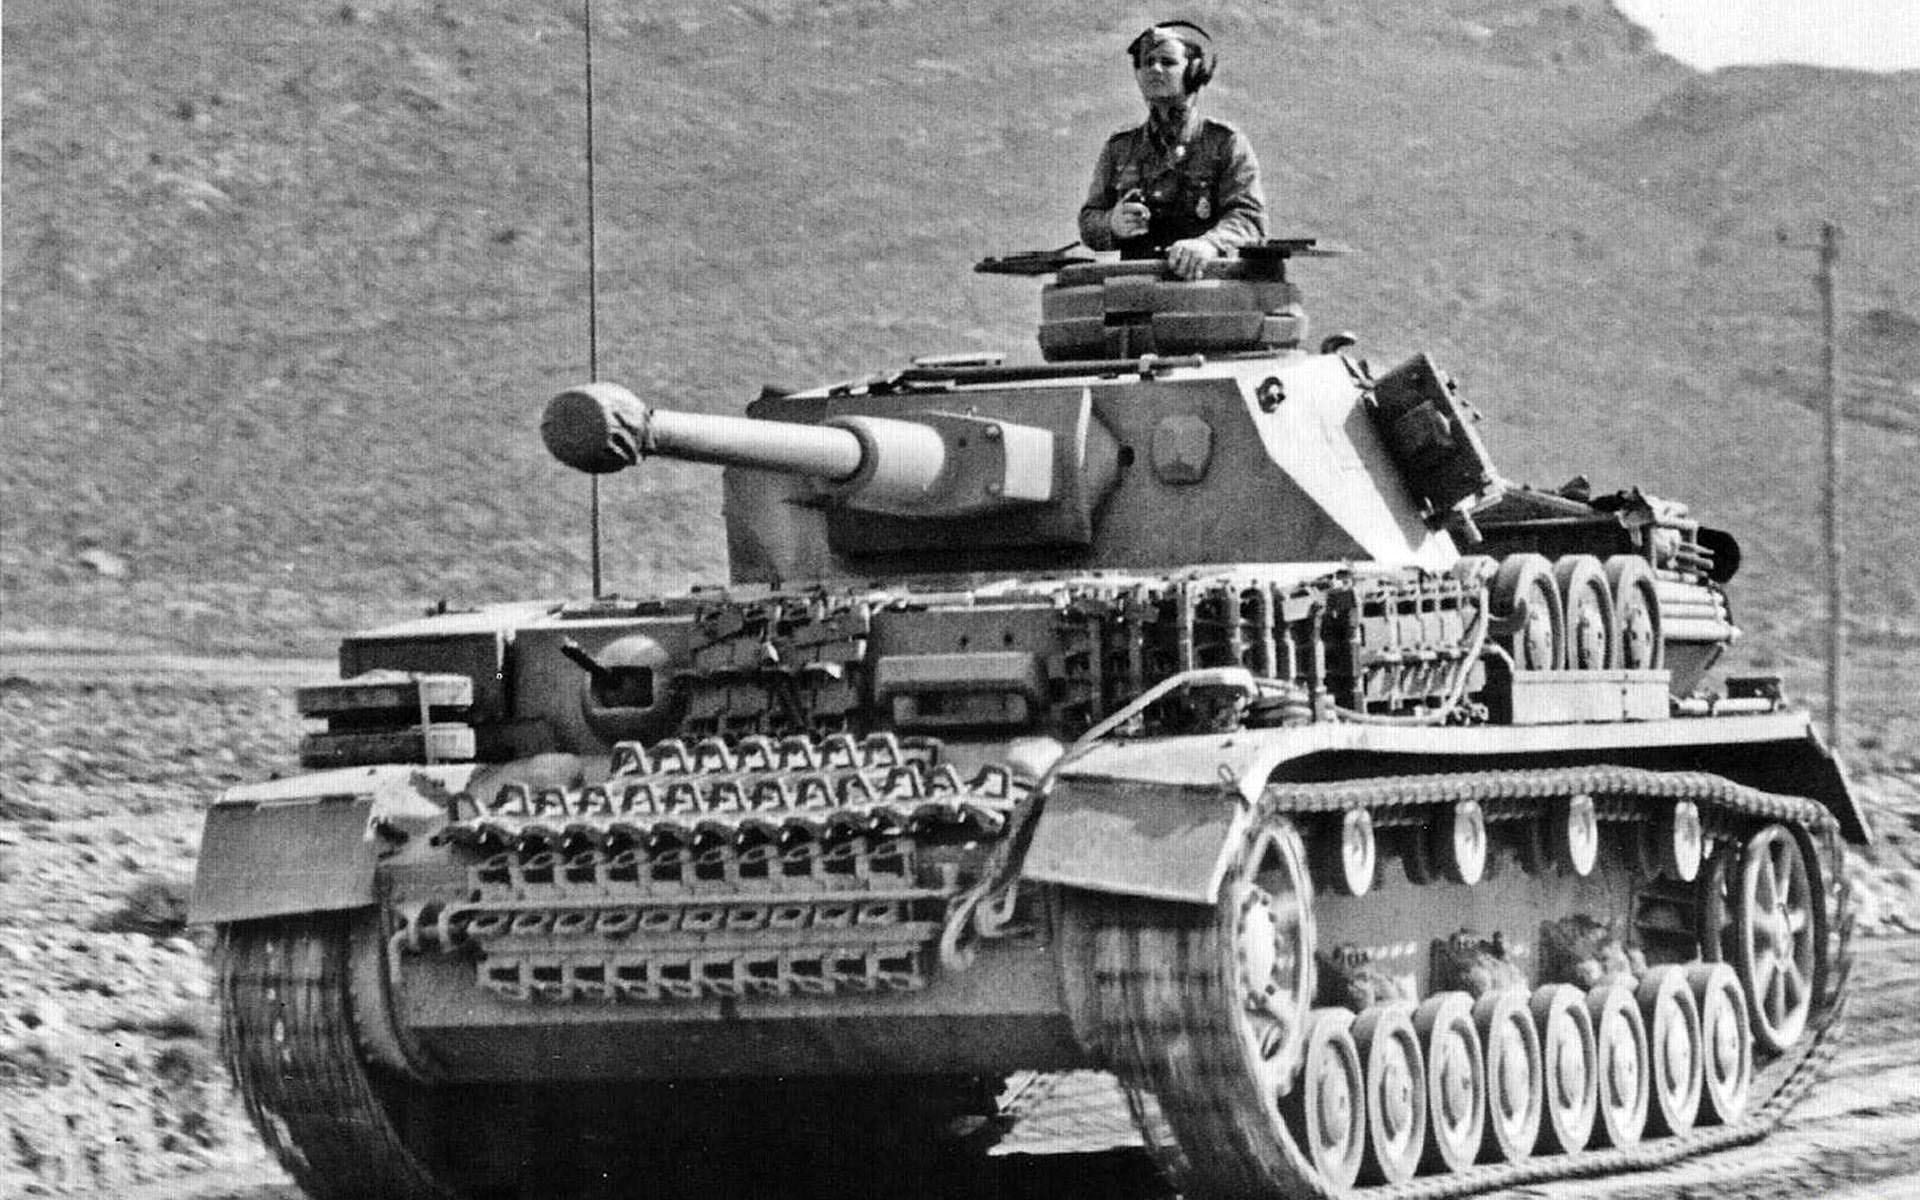 A Panzer IV Ausf.G in The Kasserine area of Tunisia, 1943